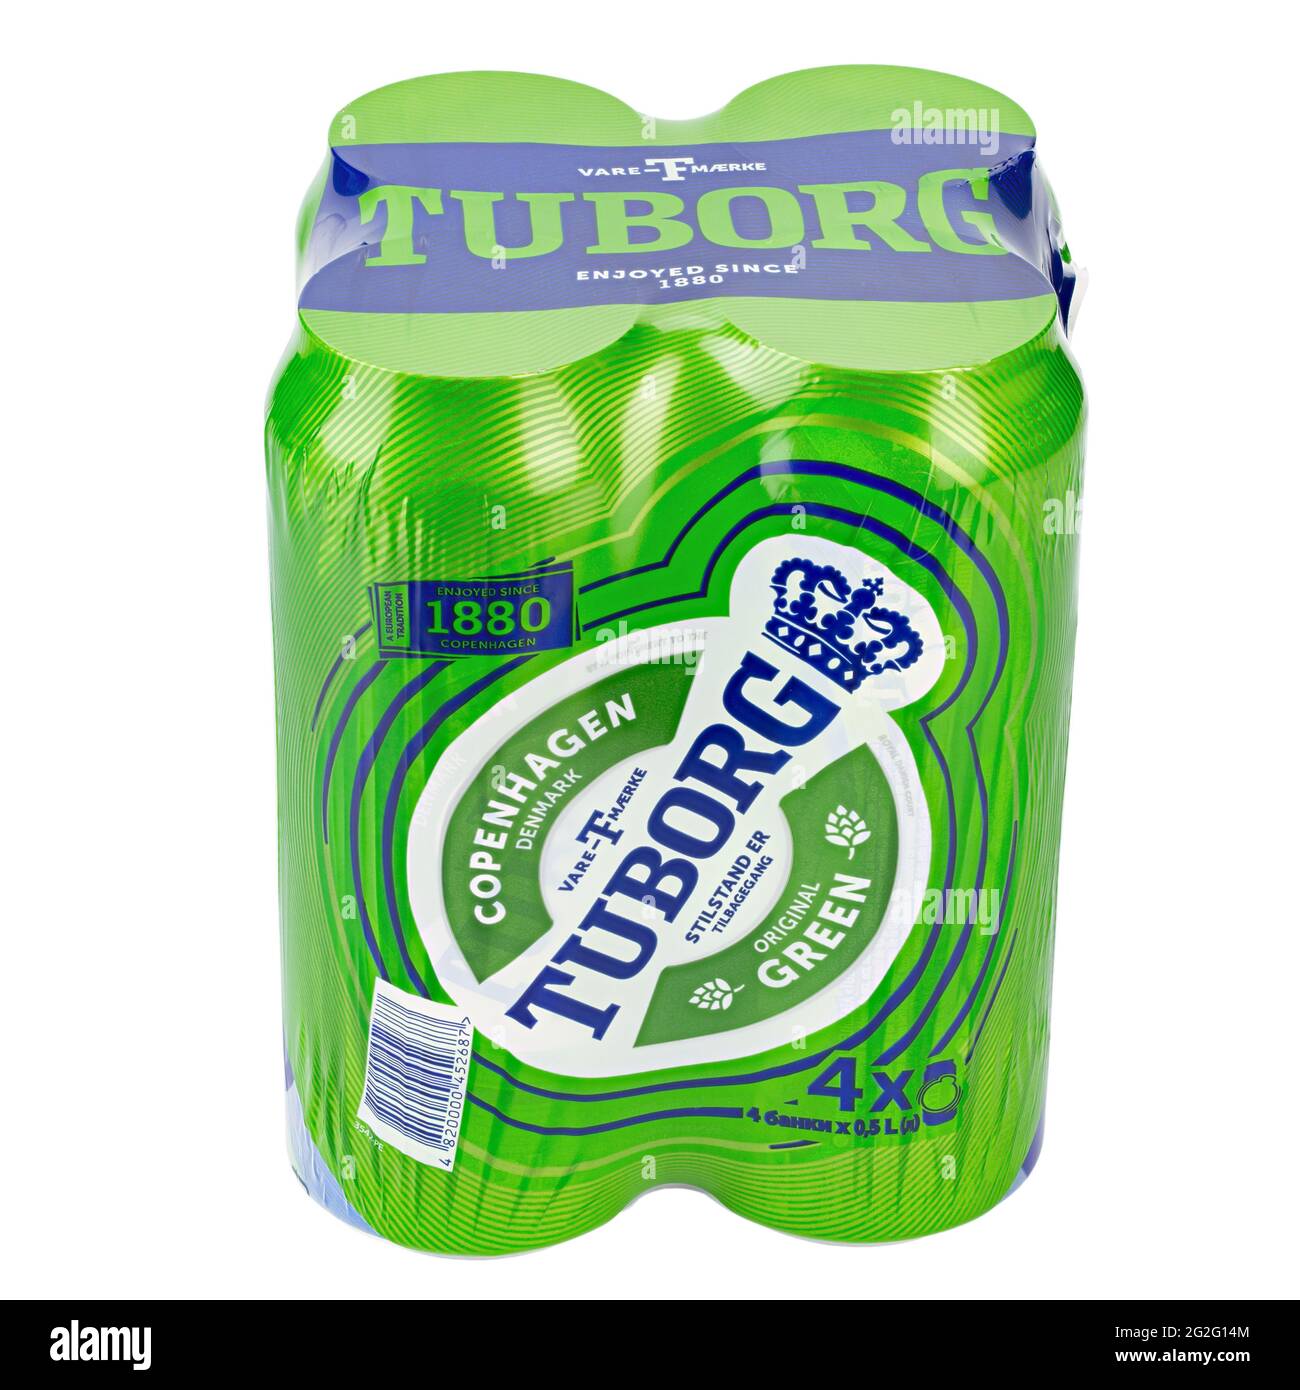 Ukraine, Kiev - May 27. 2020: Aluminium four-pack of Tuborg green beer on  white background. Tuborg is a Danish brewing company founded in 1873. File  c Stock Photo - Alamy